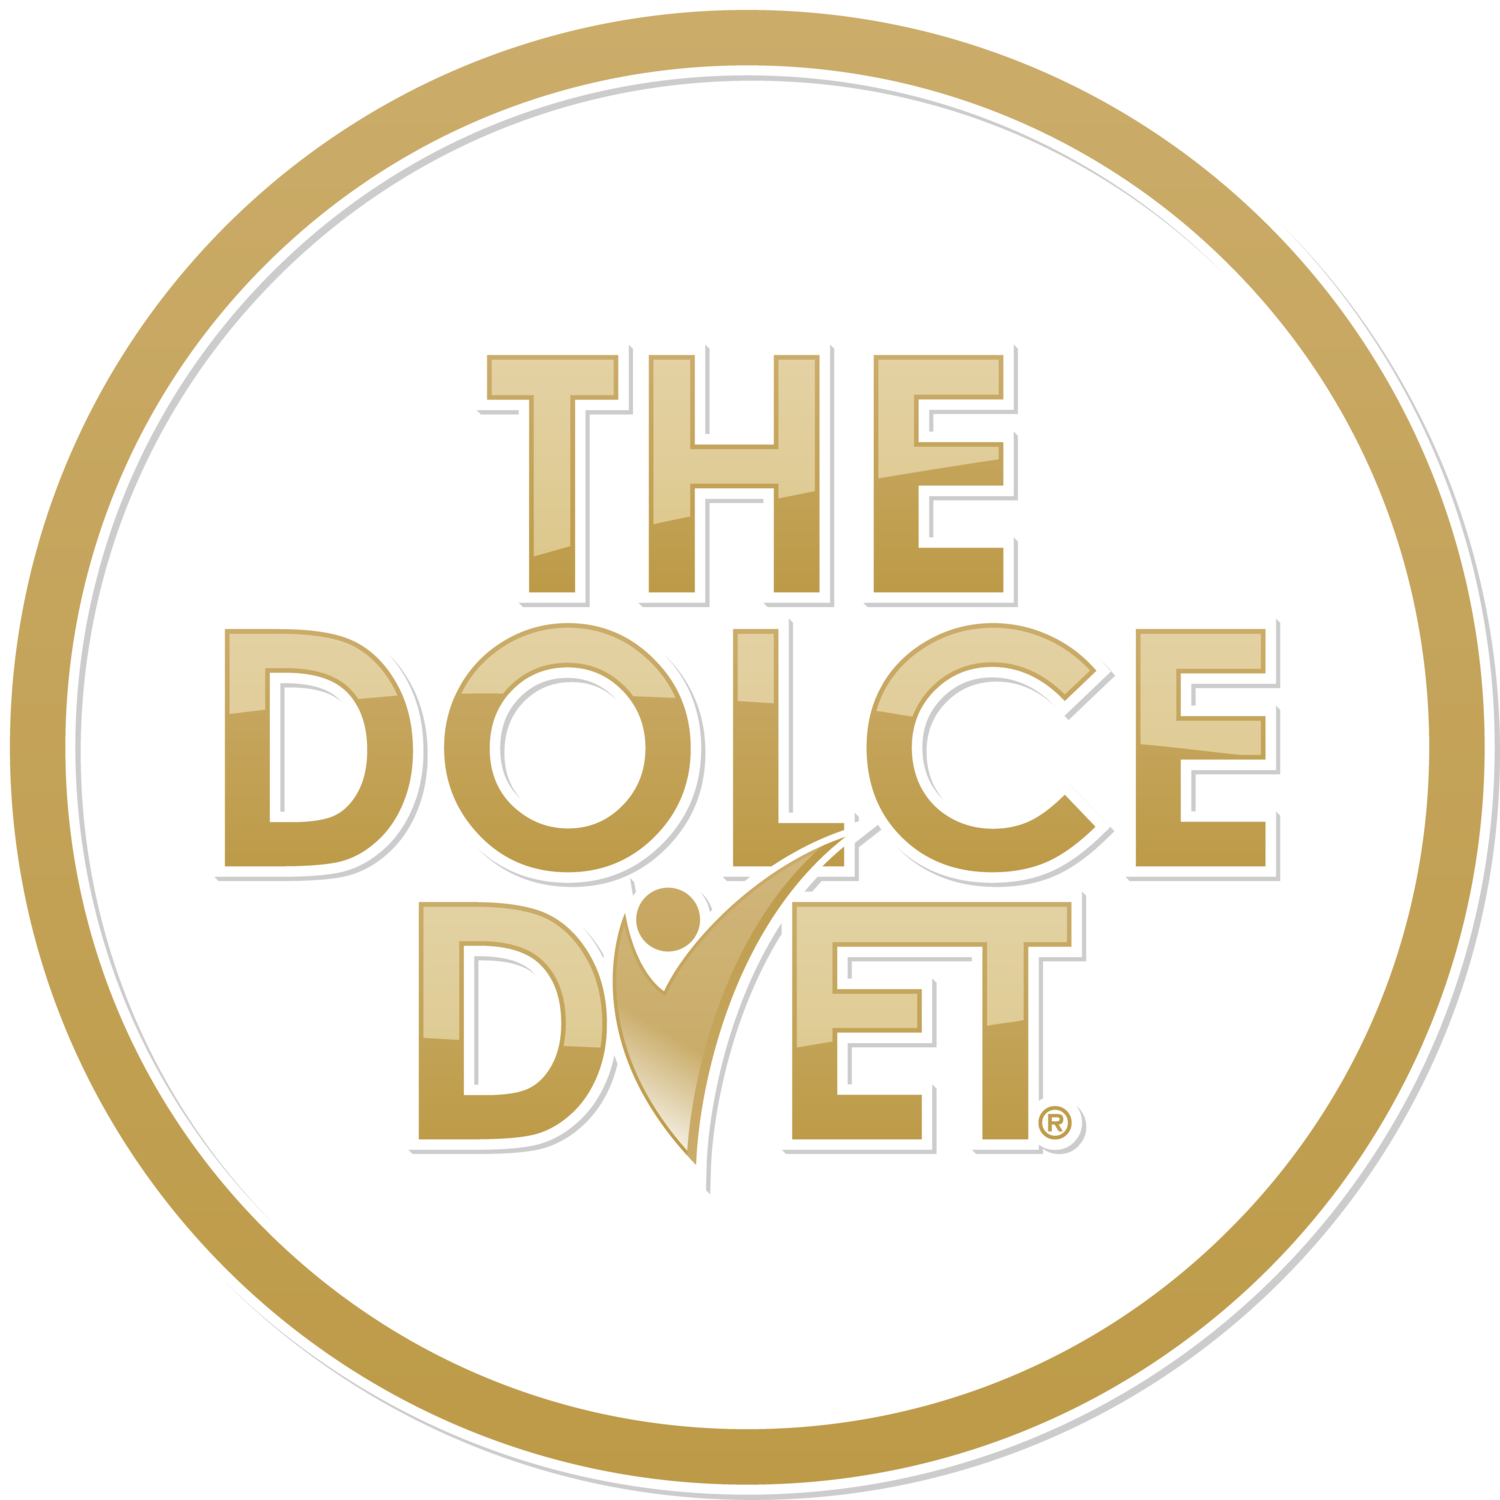 The Dolce Diet